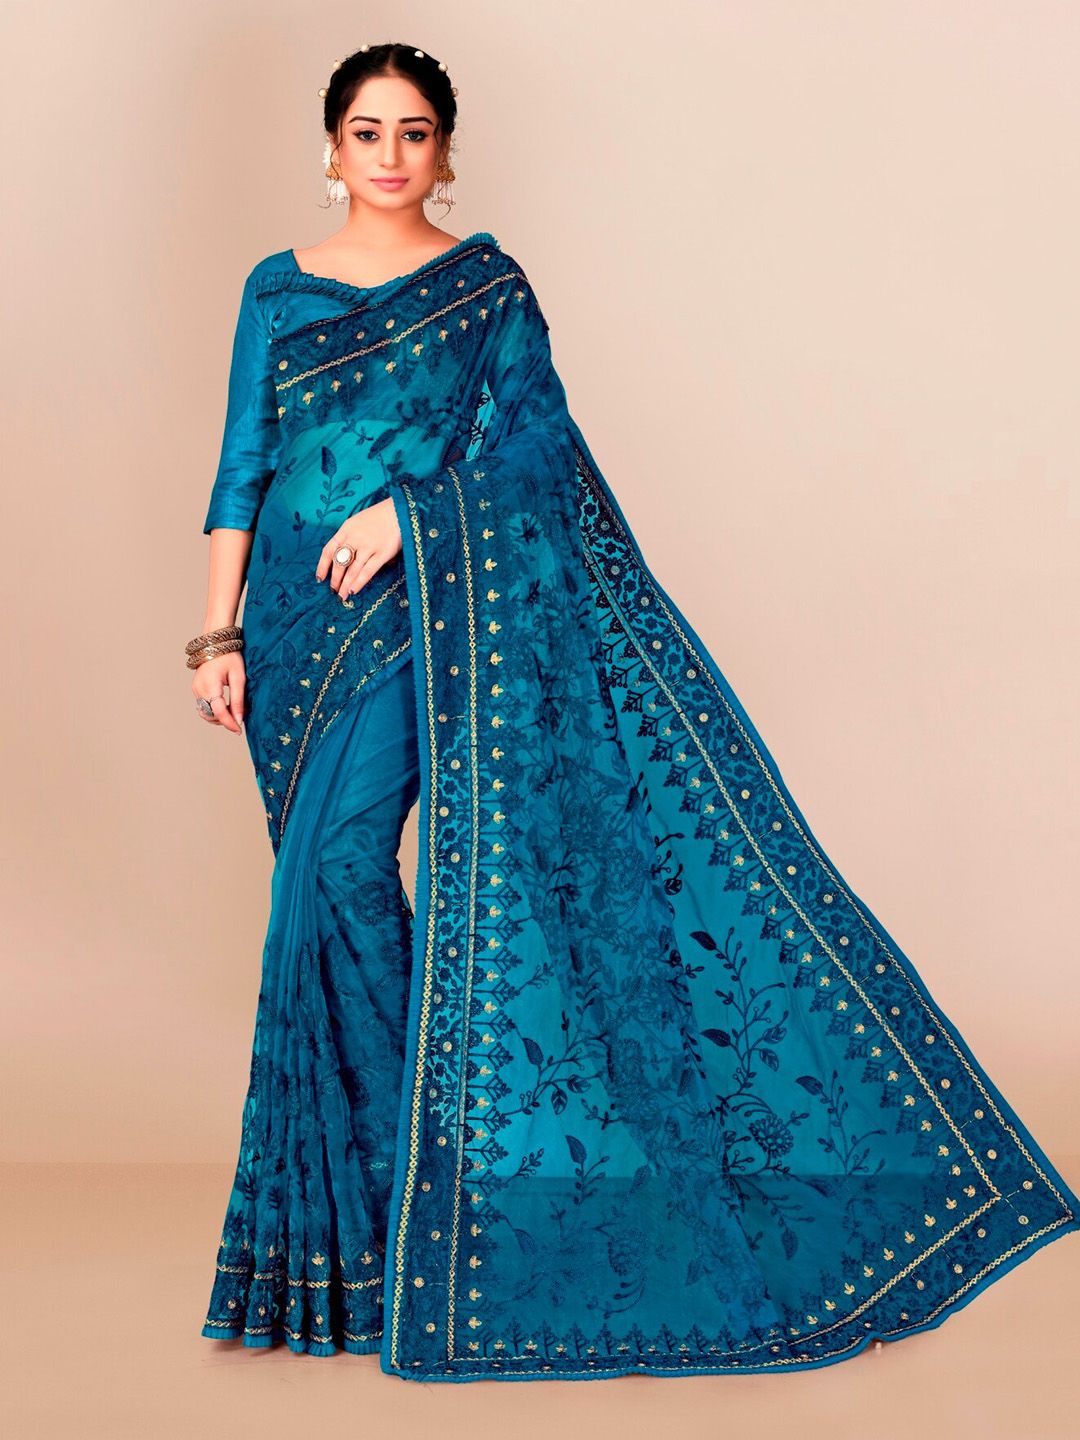 VAIRAGEE Turquoise Blue & Gold-Toned Floral Embroidered Net Saree Price in India